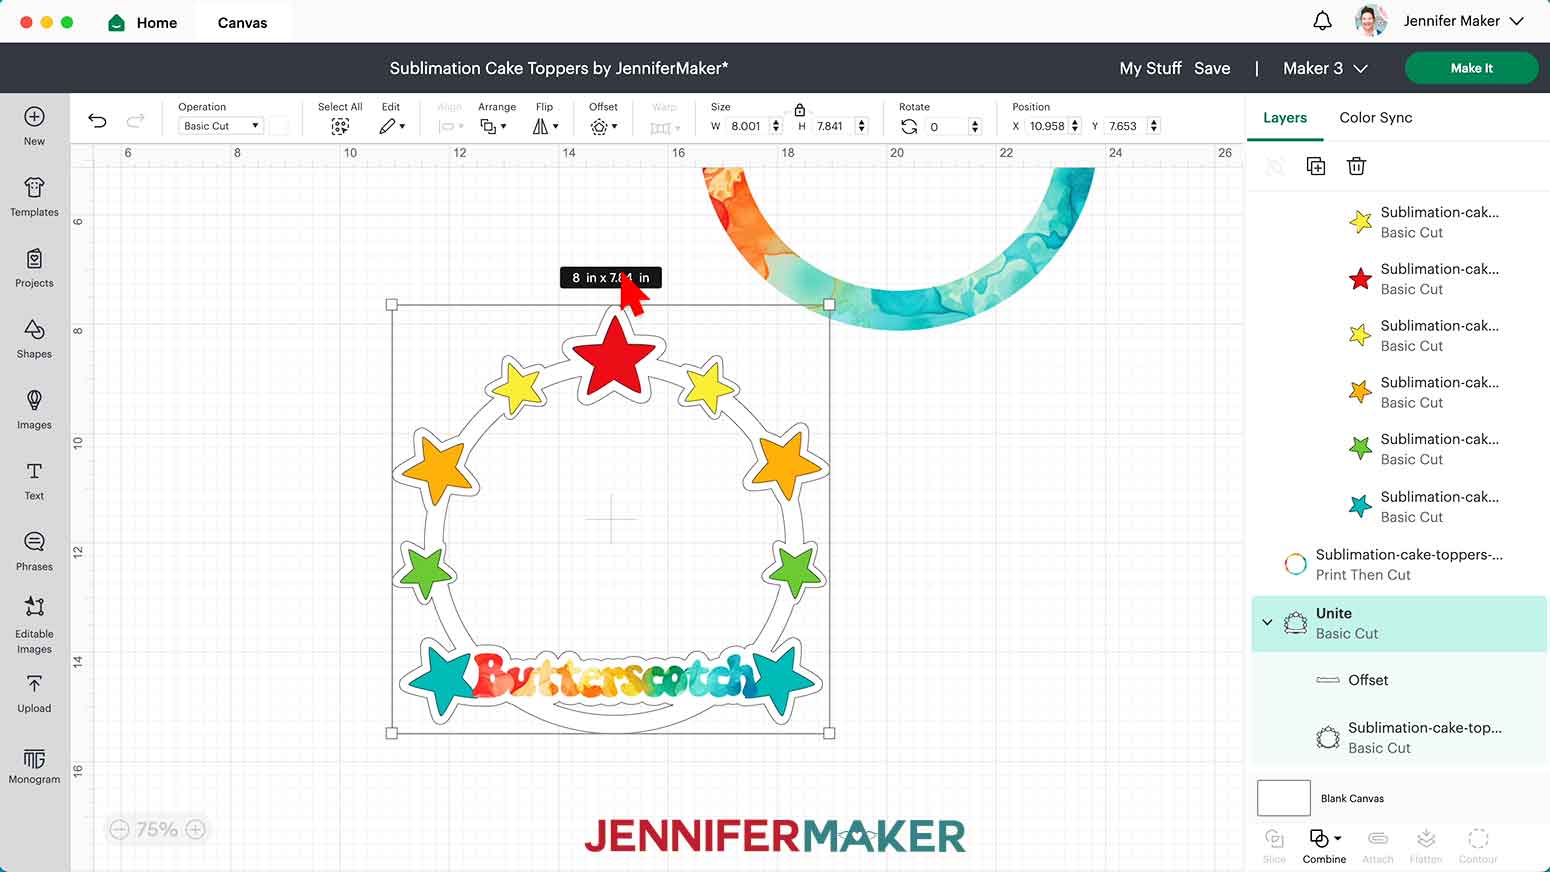 Use the Arrange and Send to Back tools to rearrange the layers in the correct order for the stars and watercolor text to appear.